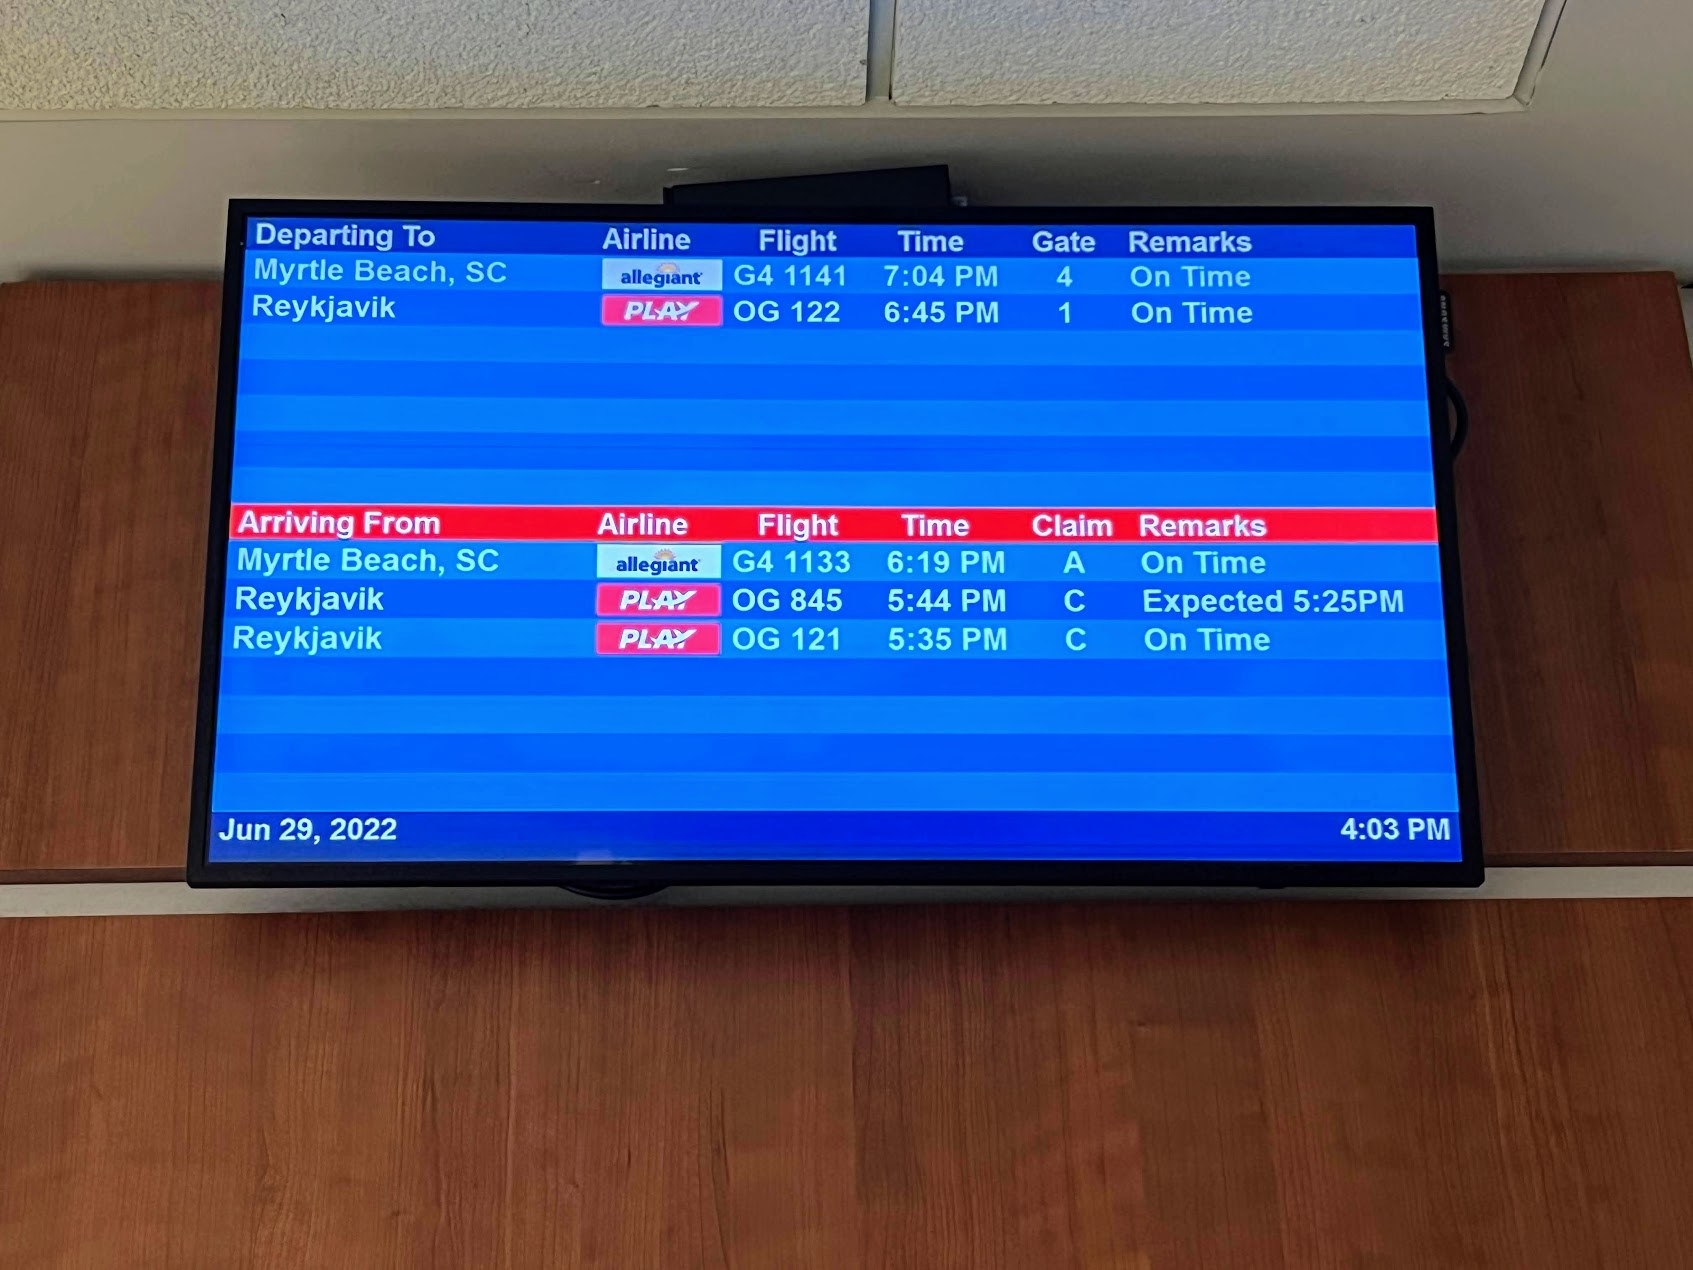 The airport screen